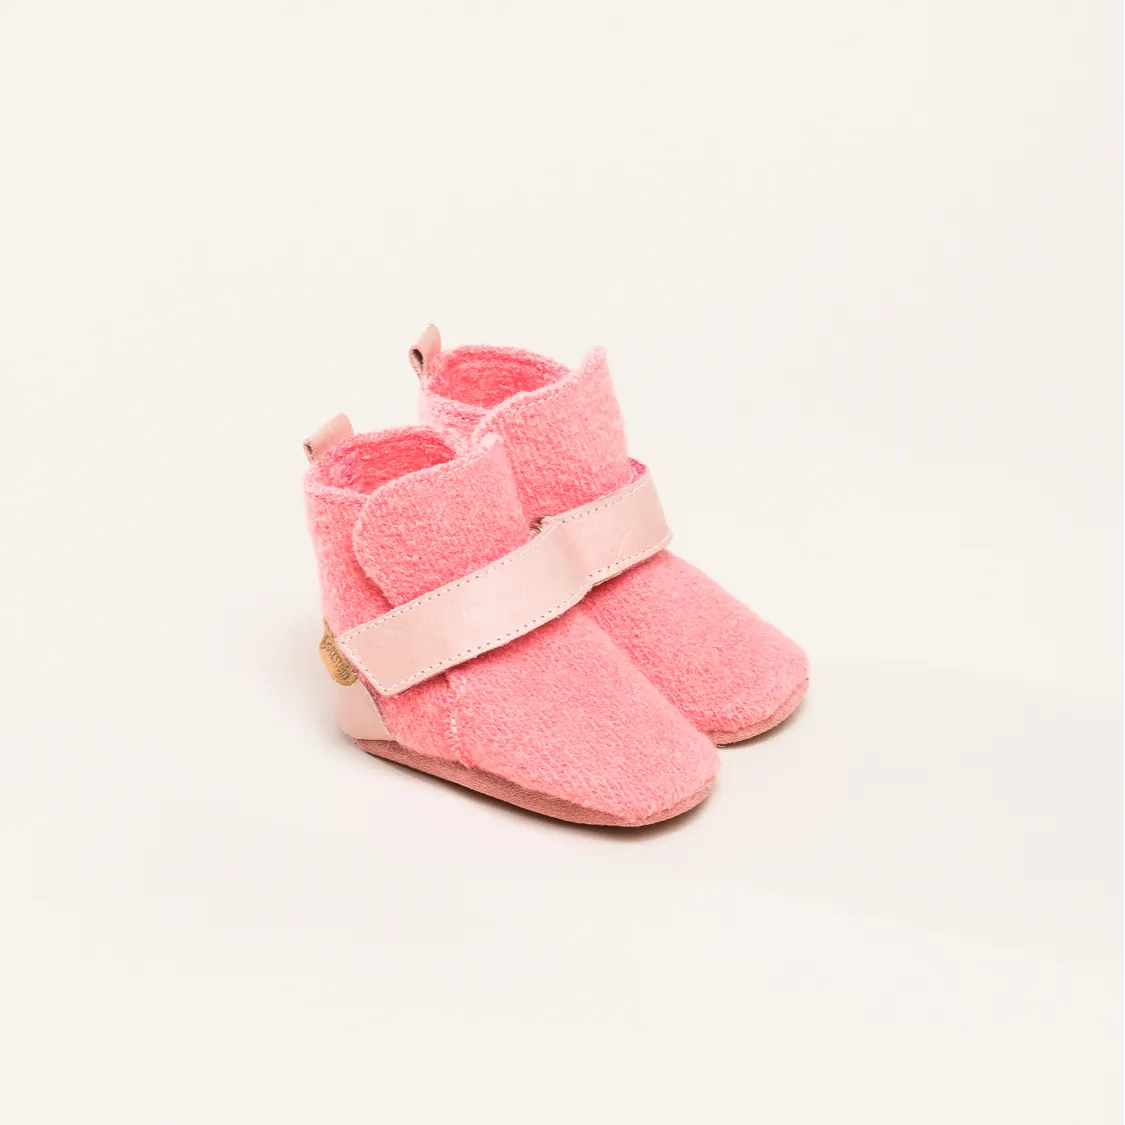 Baby shoe bootee